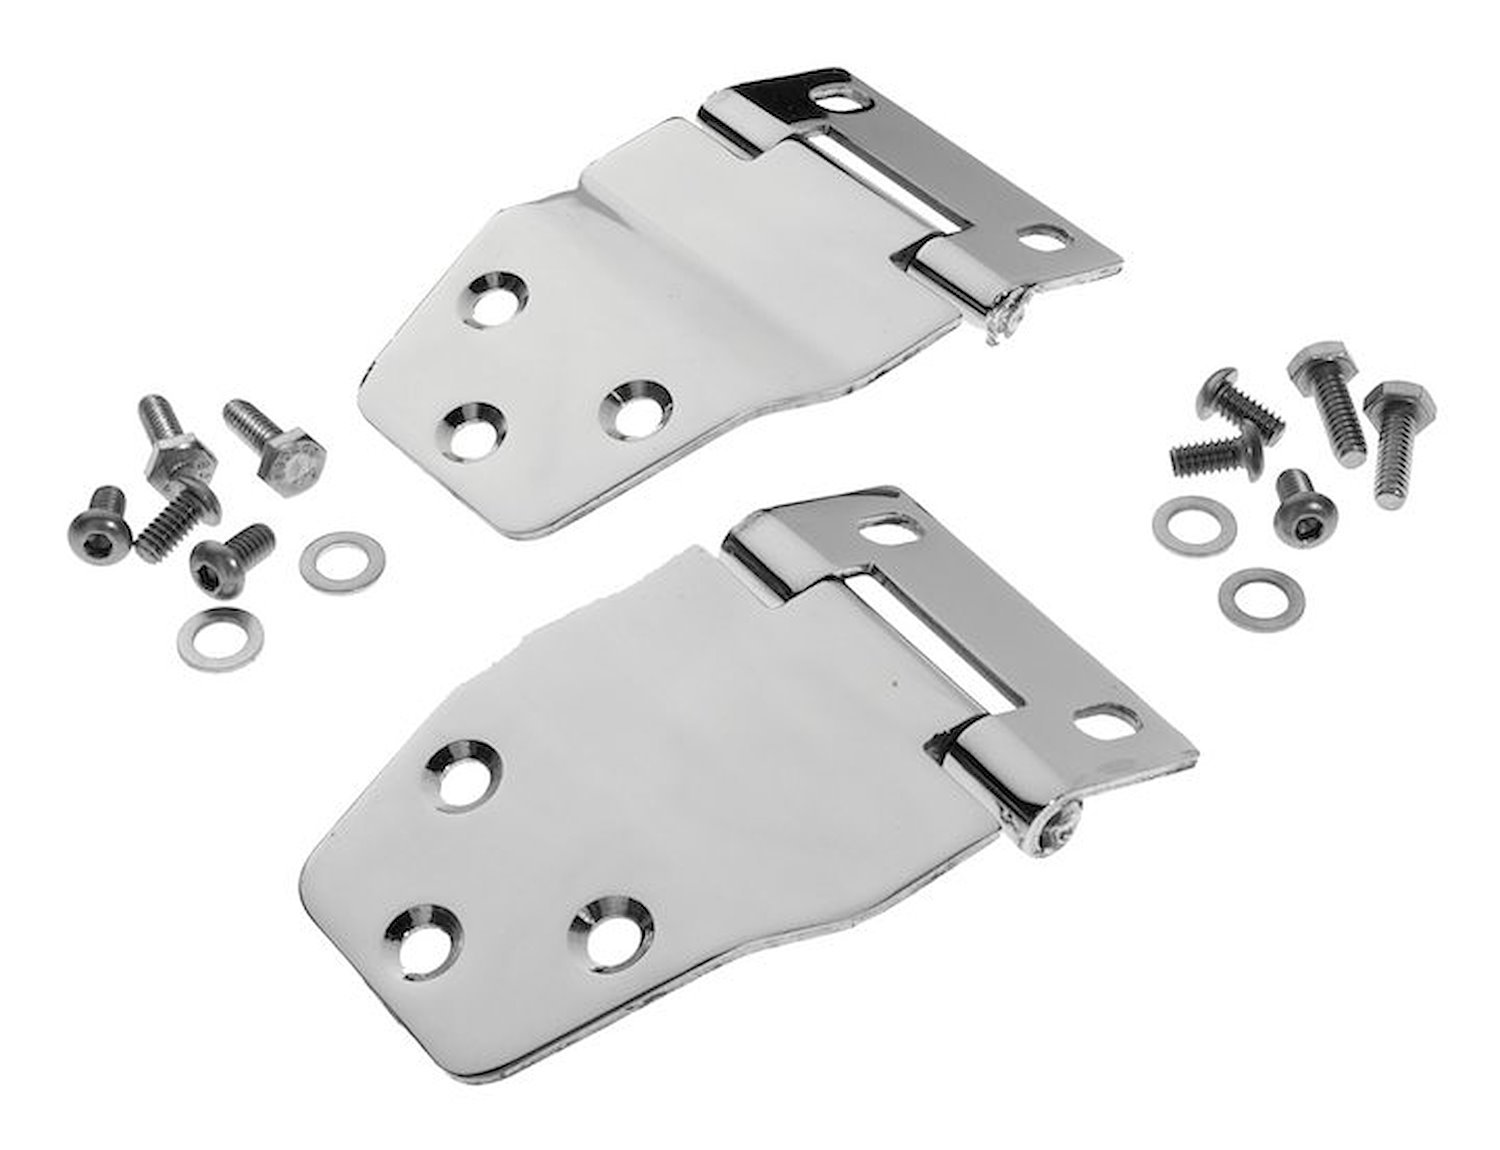 RT34032 Stainless Hardtop Liftgate Hinge Set for 1977-1986 Jeep CJ-7; Includes 2 Hinges and Hardware